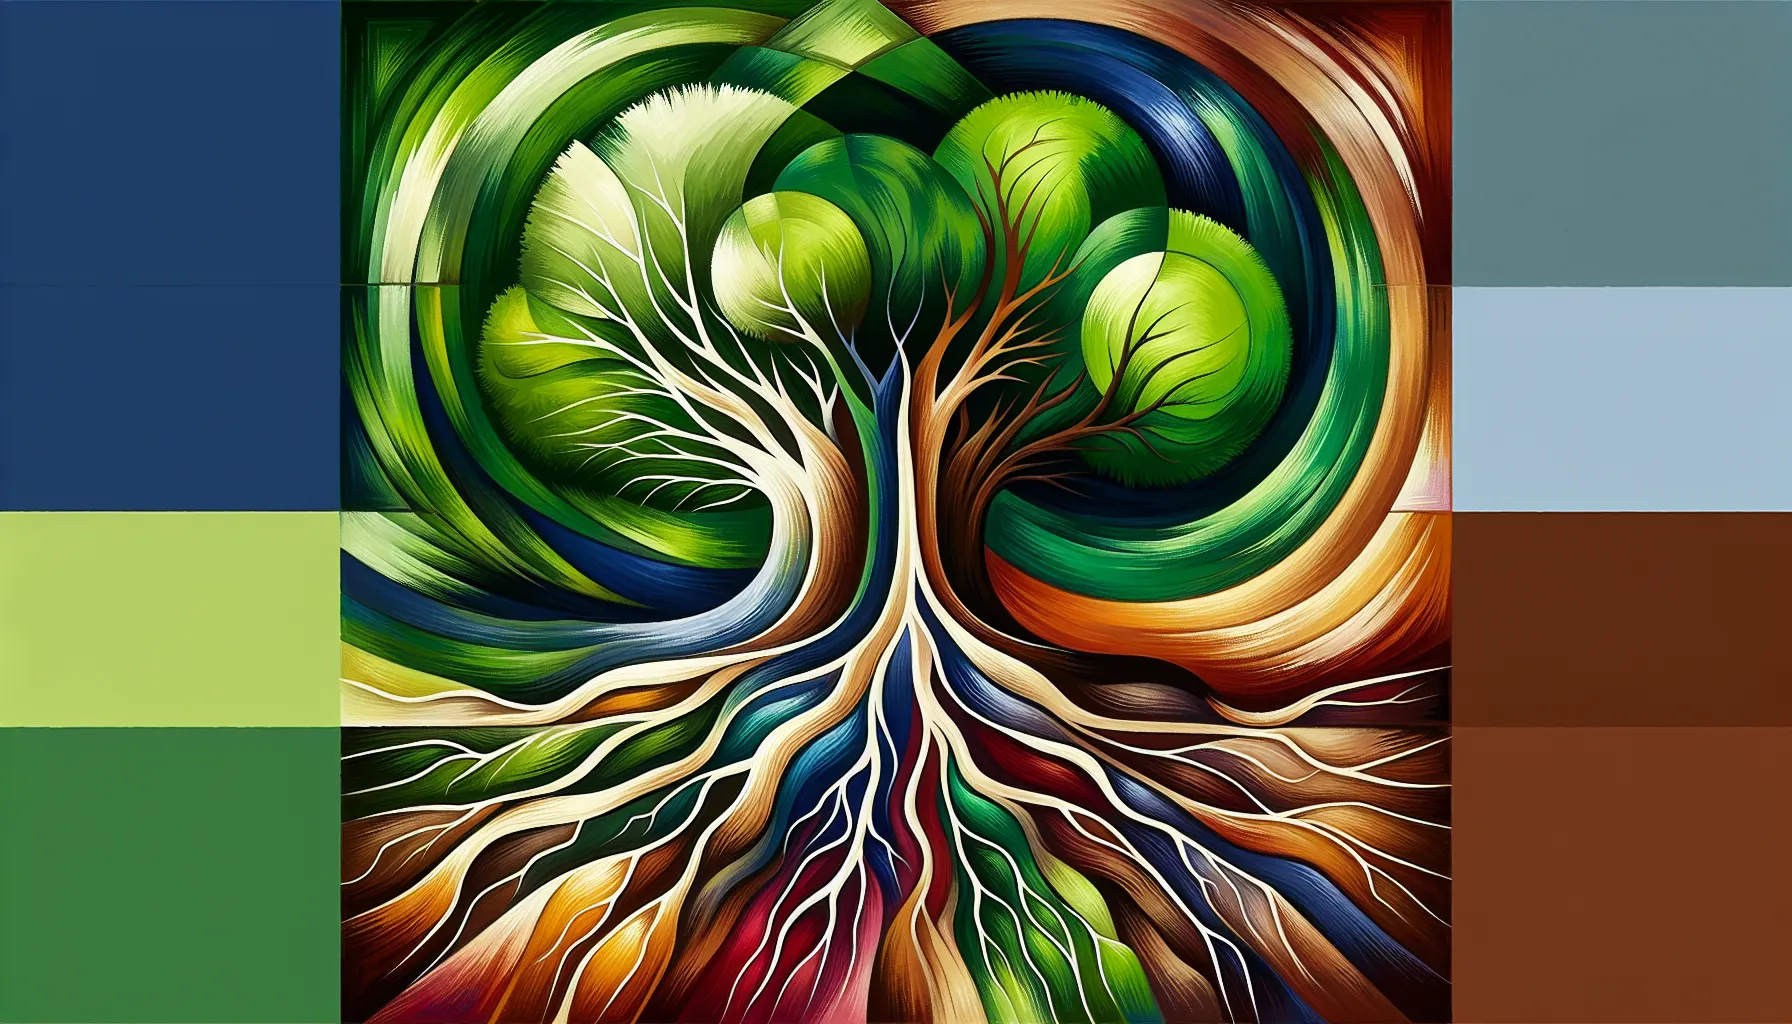 Like a grove of trees sharing a common soil, a quad relationship nurtures individual strength even as their roots mingle in unseen support, embodying the unity and shared vitality of polyamorous interconnection.